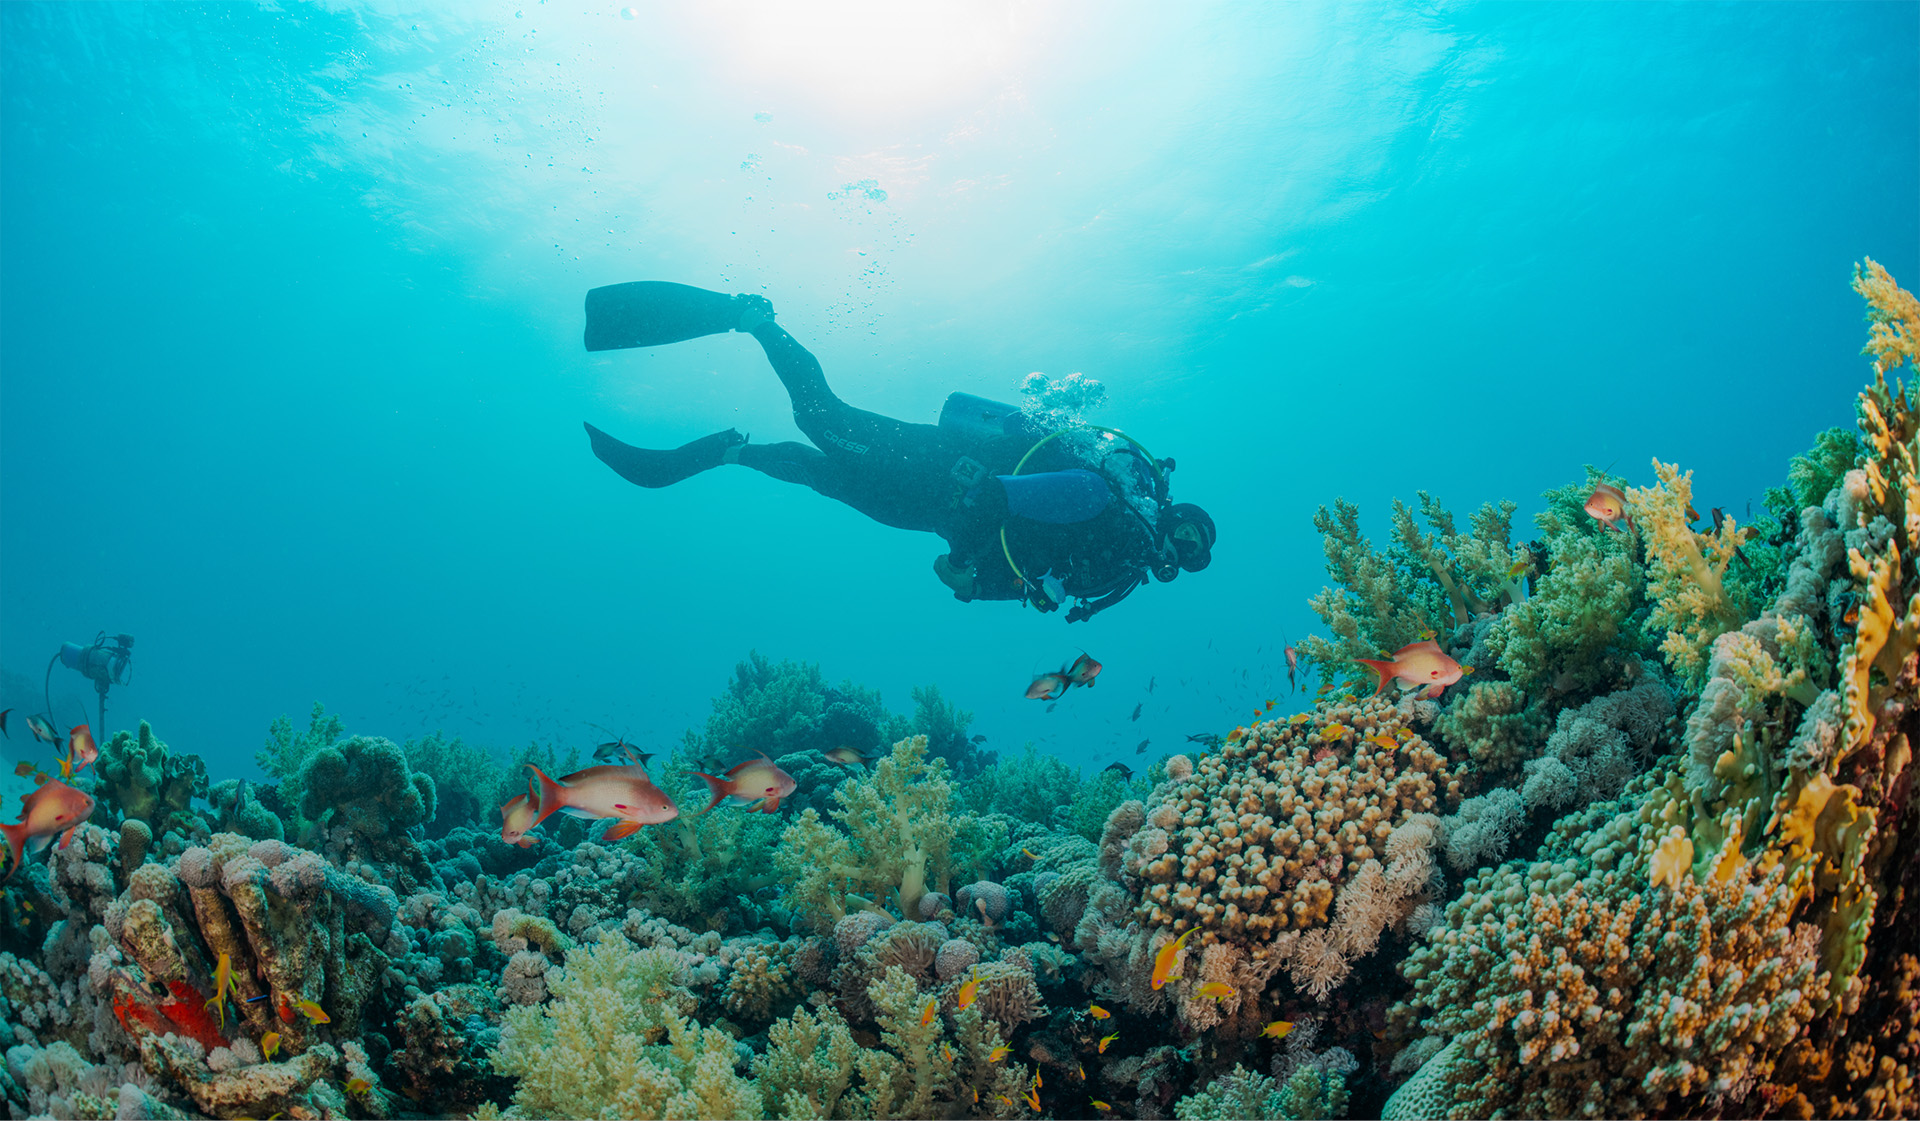 Acuatic and diving experiences under the water in the Red Sea